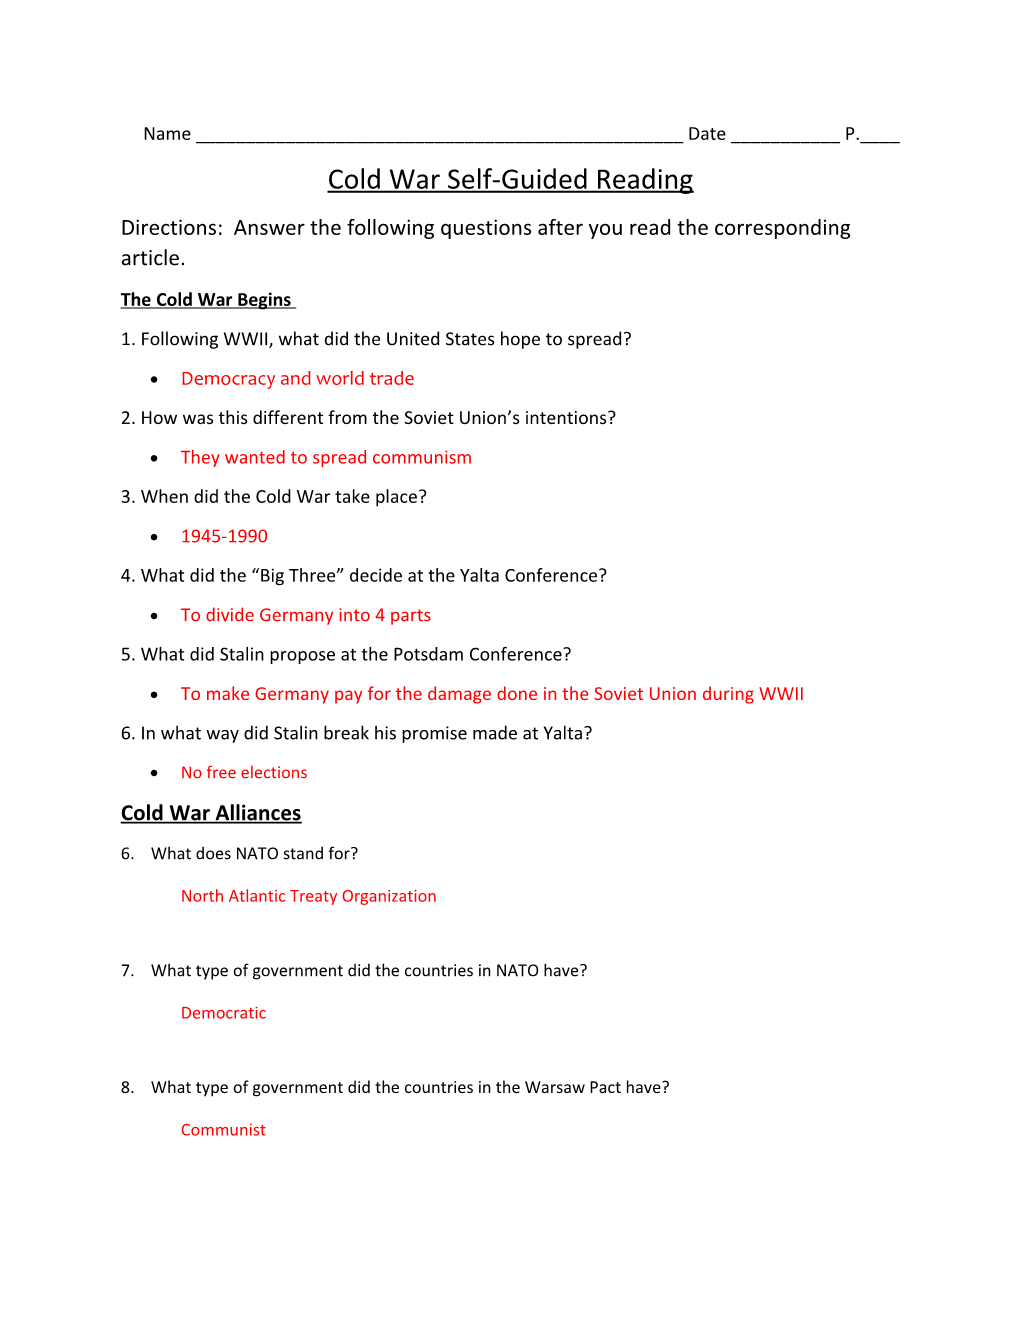 Cold War Self-Guided Reading